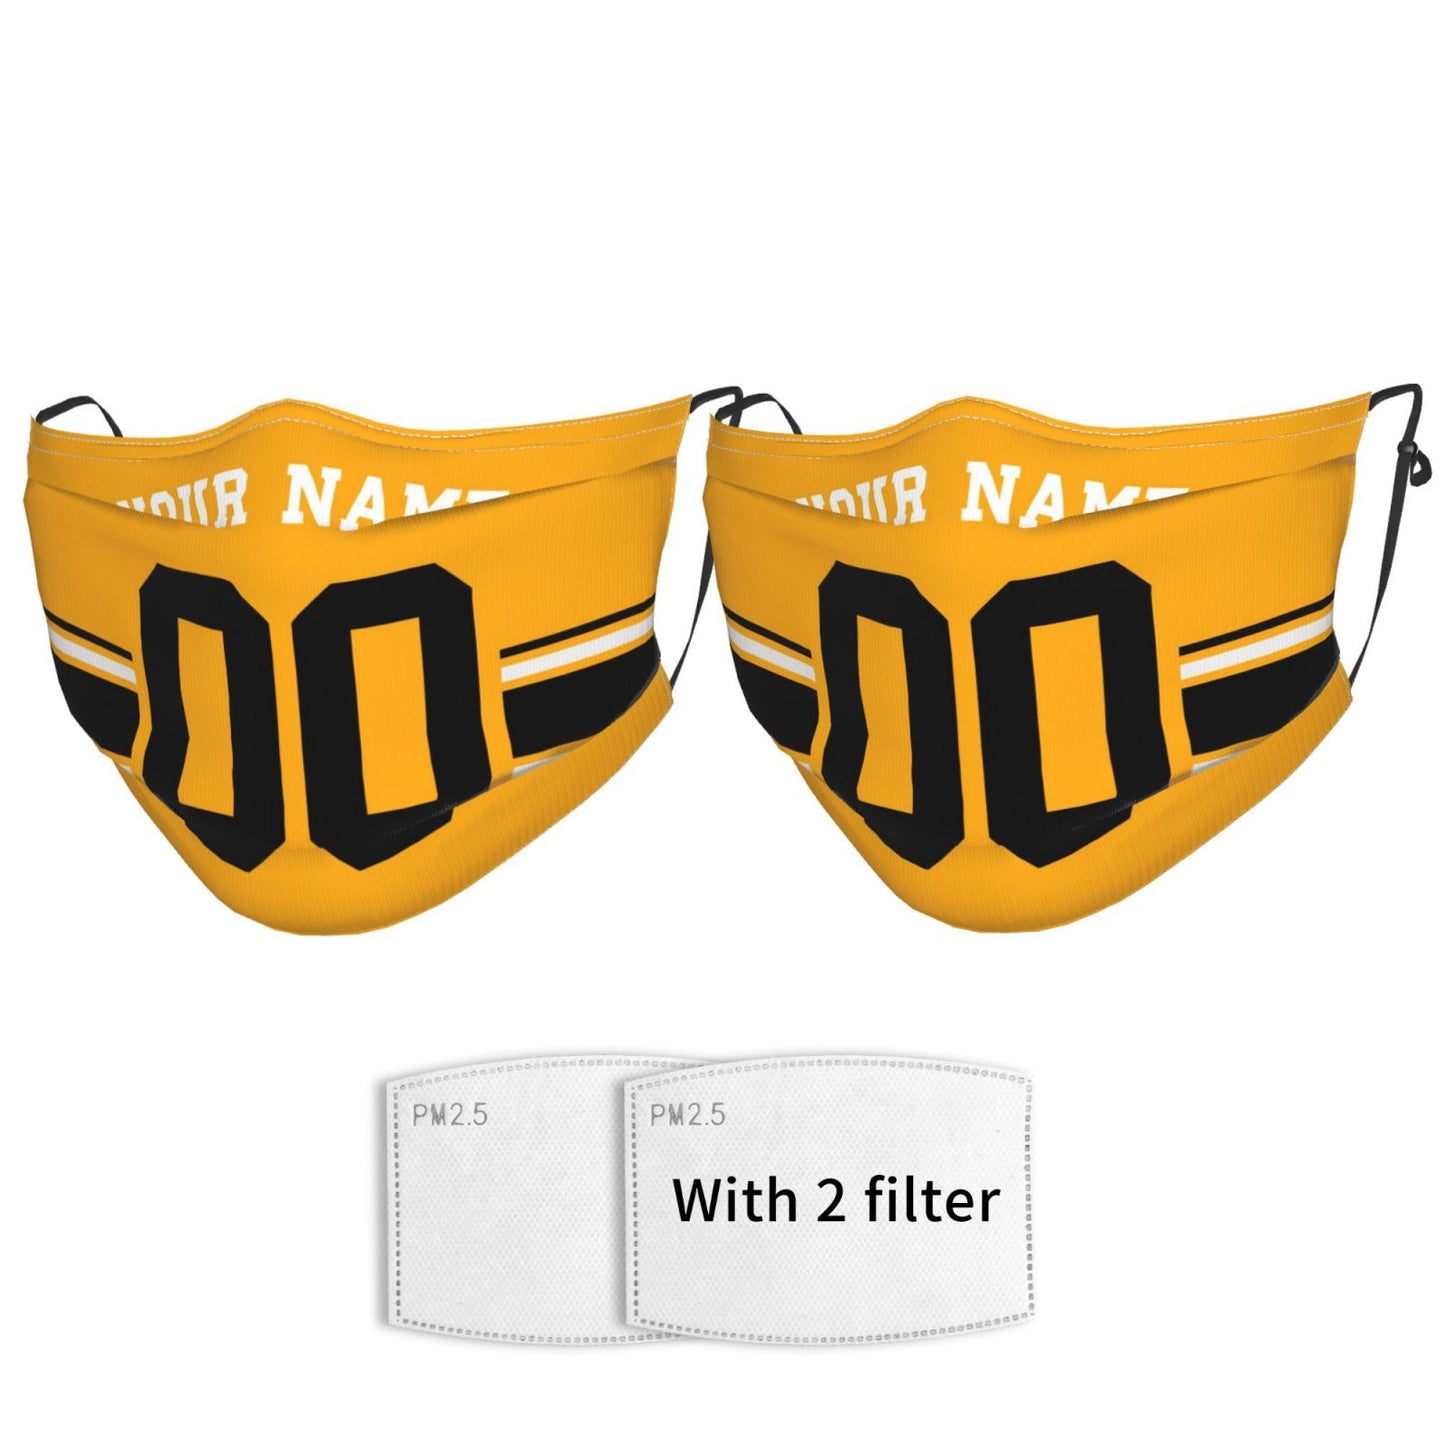 2-Pack Pittsburgh Steelers Face Covering Football Team Decorative Adult Face Mask With Filters PM 2.5 Gold